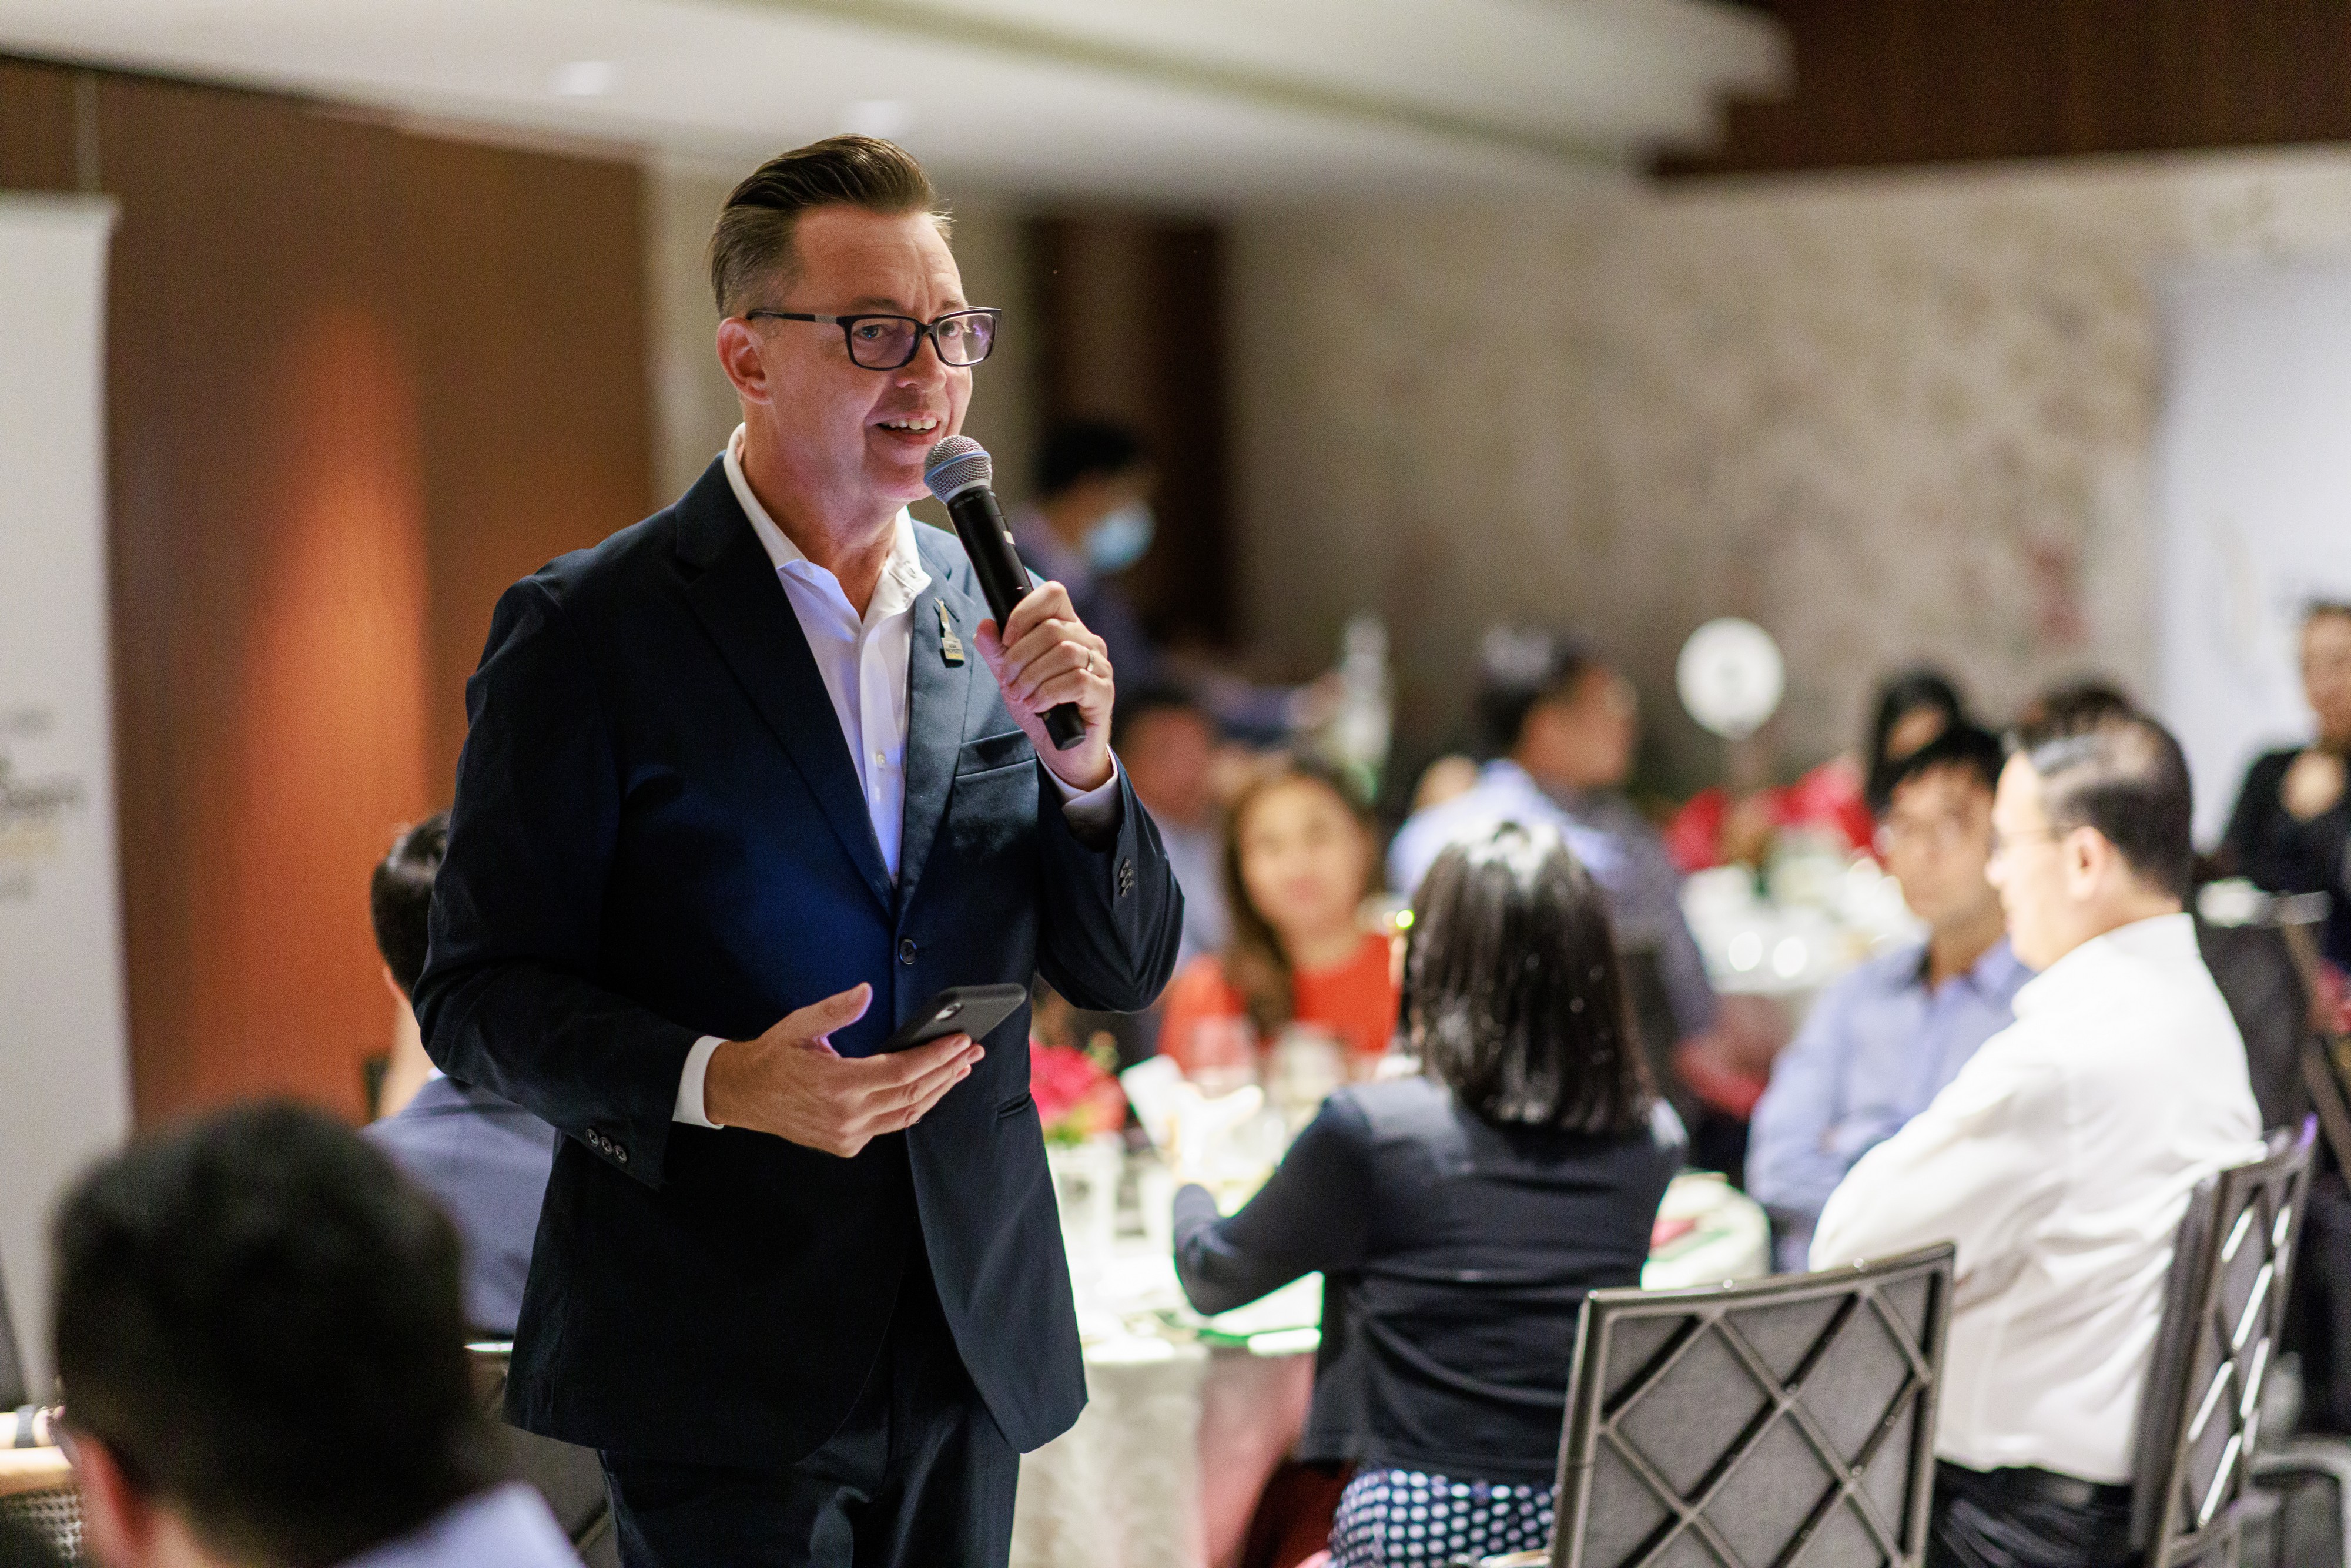 Jules Kay, General Manager of PropertyGuru Asia Property Awards & Events, delivers his opening remarks during the PropertyGuru Asia Property Awards (Singapore) Leaders’ Luncheon on 12 May at The Capitol Kempinski Hotel Singapore